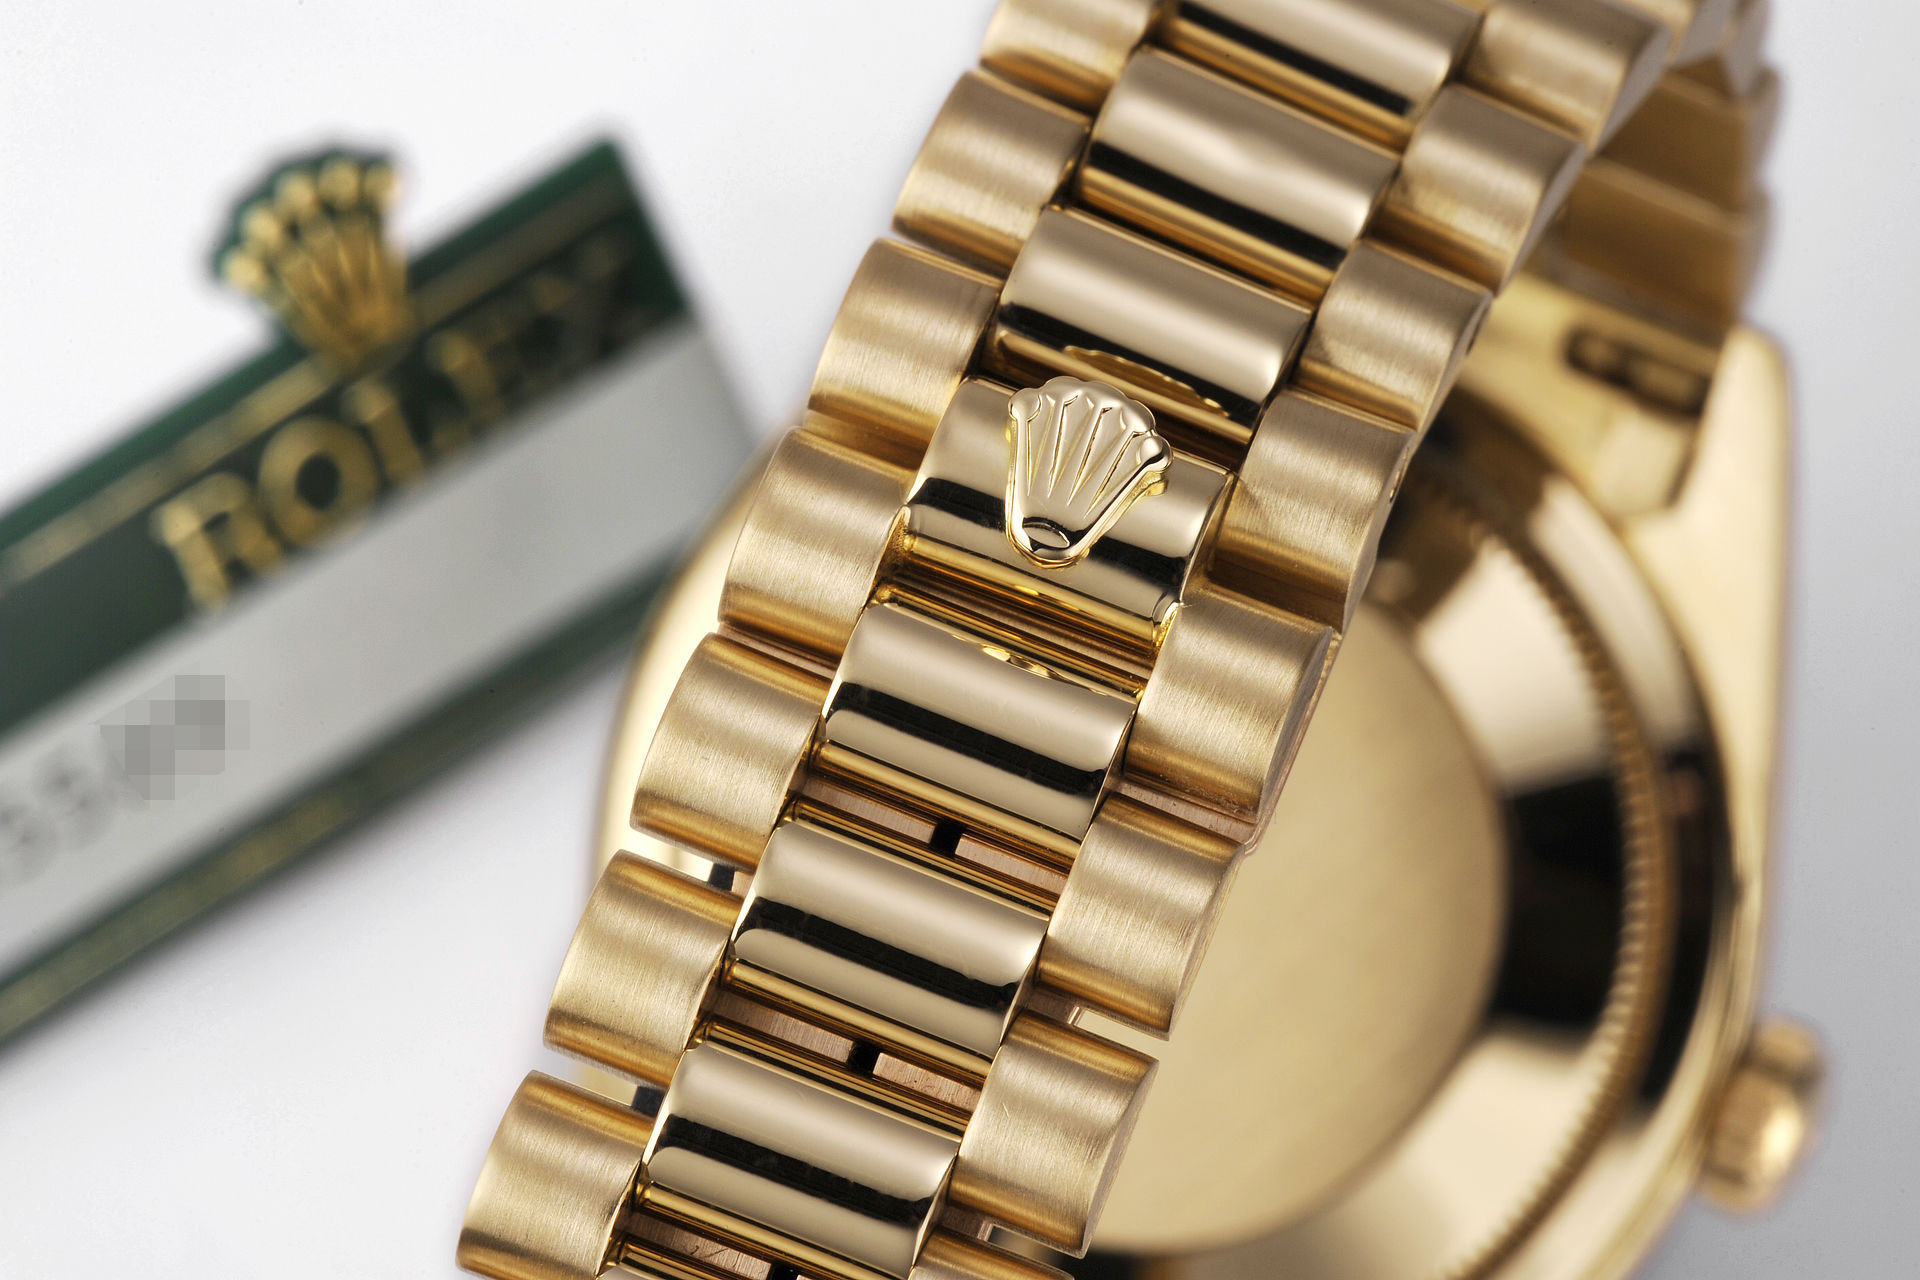 ref 18238 | 18ct Yellow Gold 'Box & Papers' | Rolex Day-Date